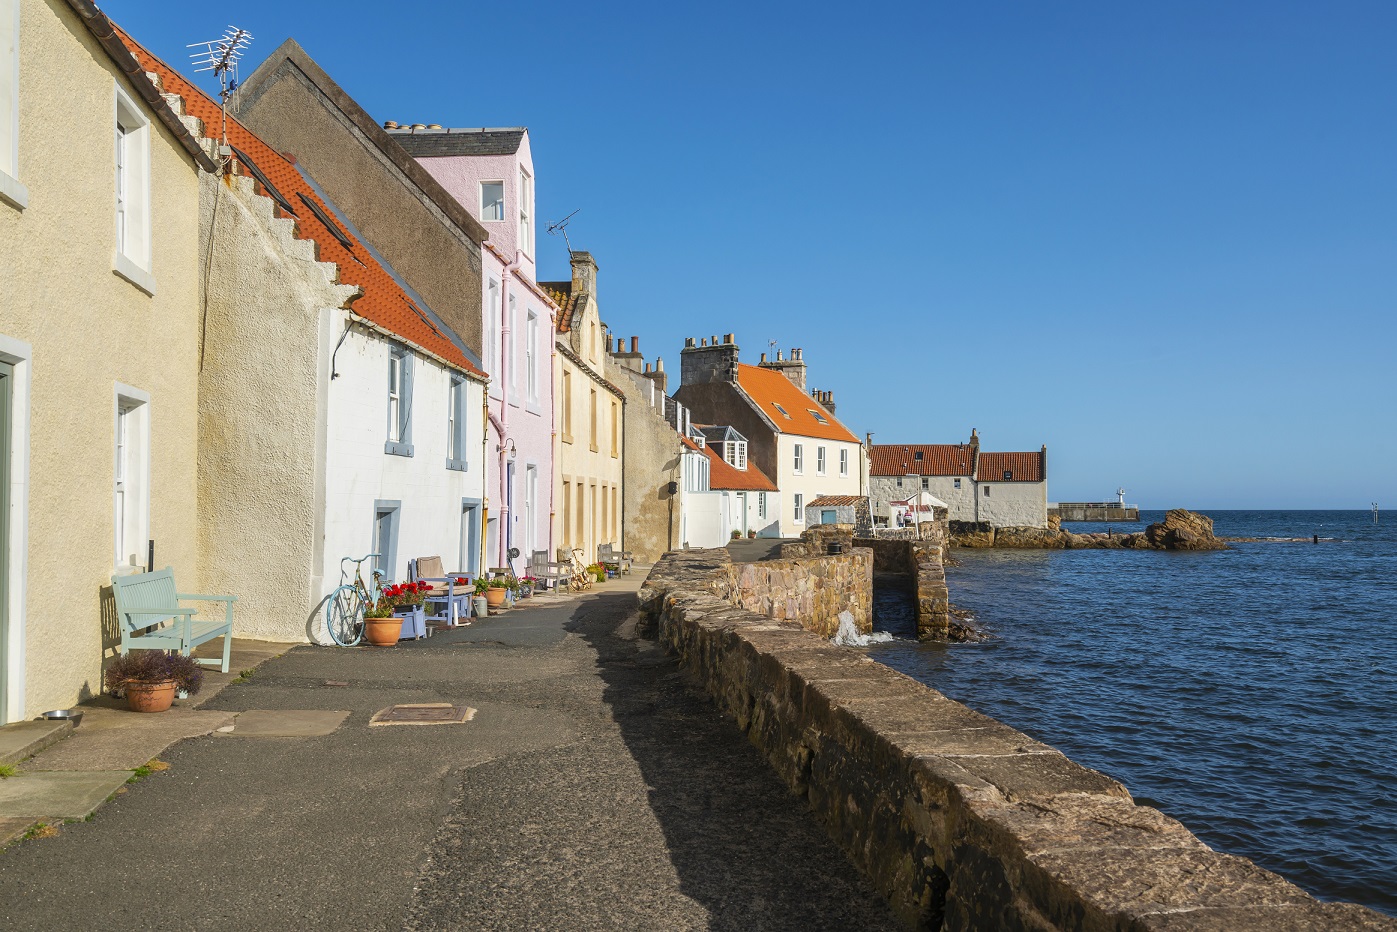 an images of small brightly coloured cottages overlooking the sea.